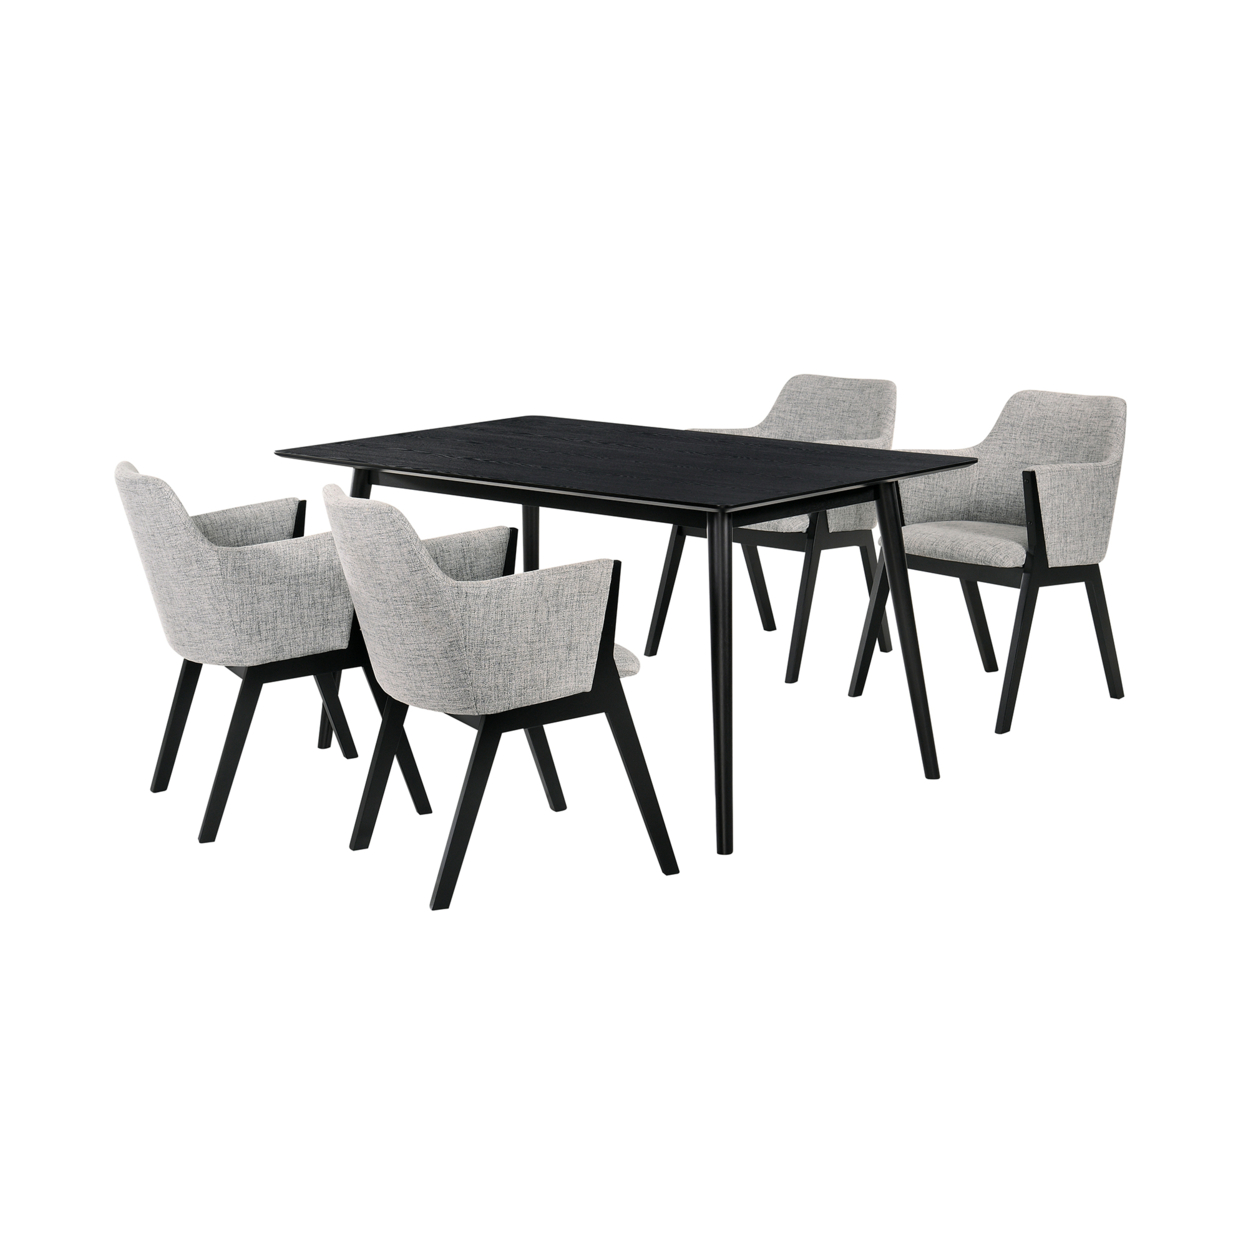 5 Piece Dining Set With Track Arm Chairs, Black And Gray- Saltoro Sherpi